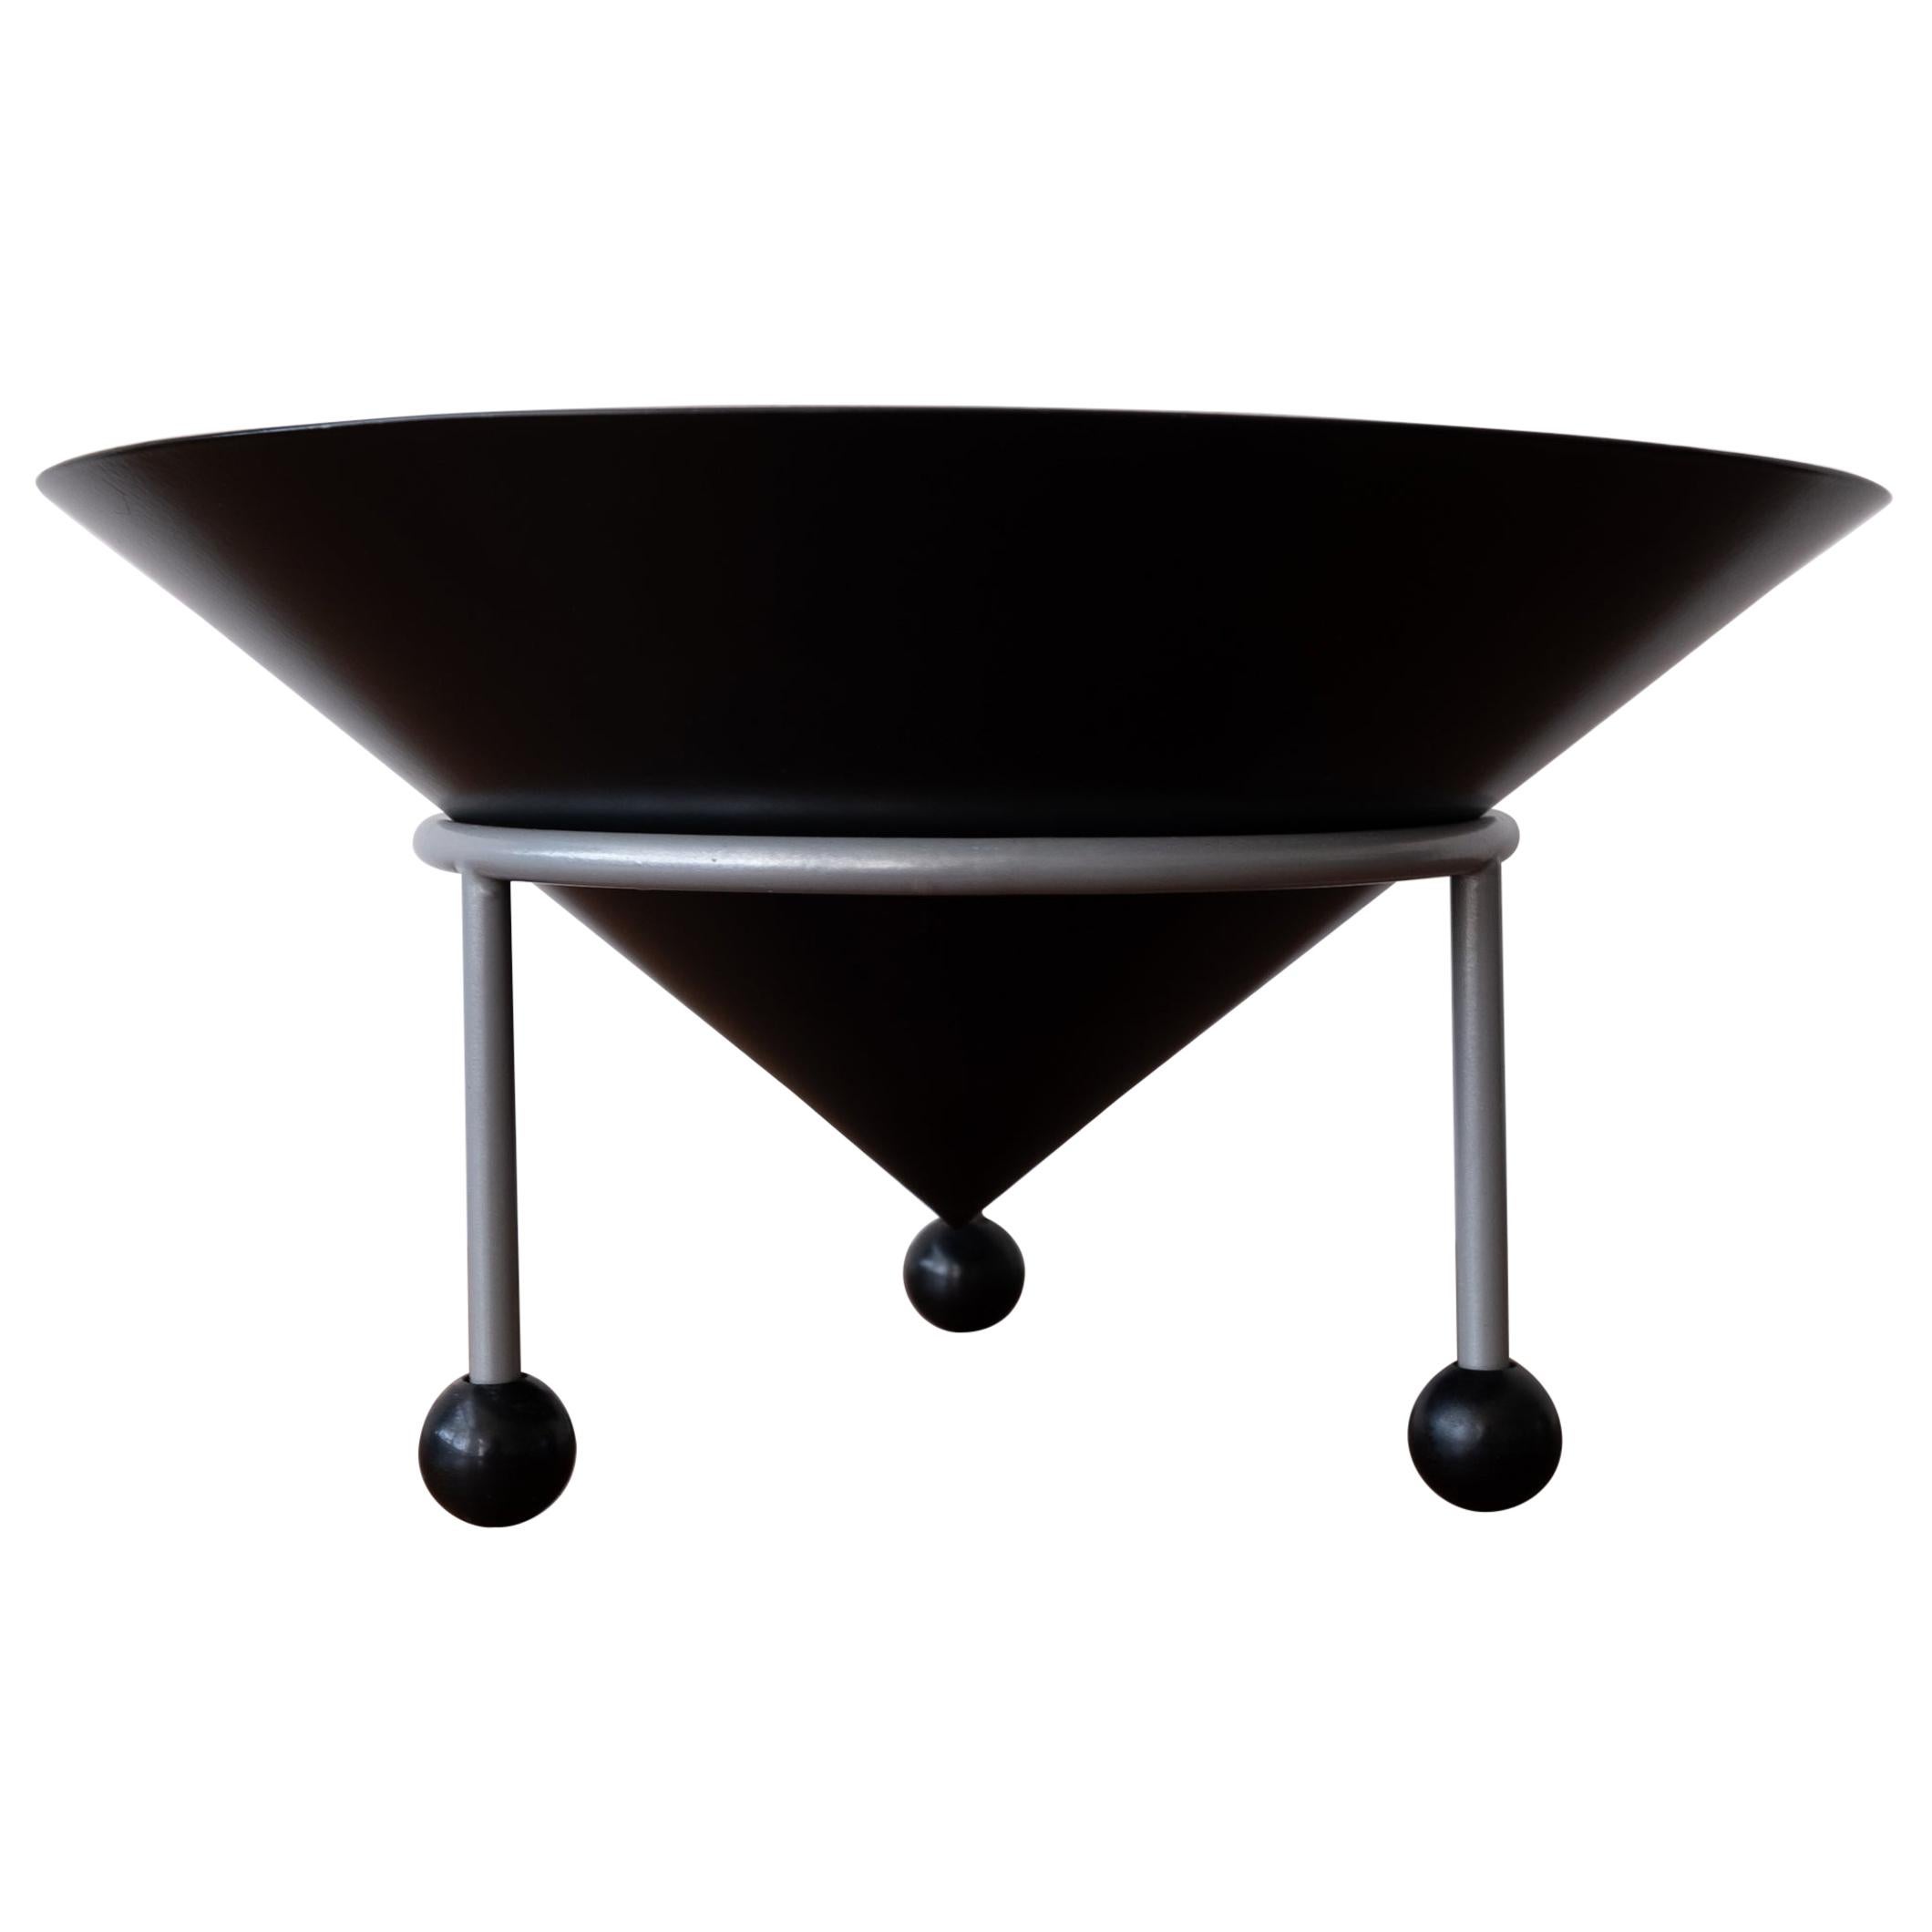 Post-Modern Bowl by Christian Duc, 1981 